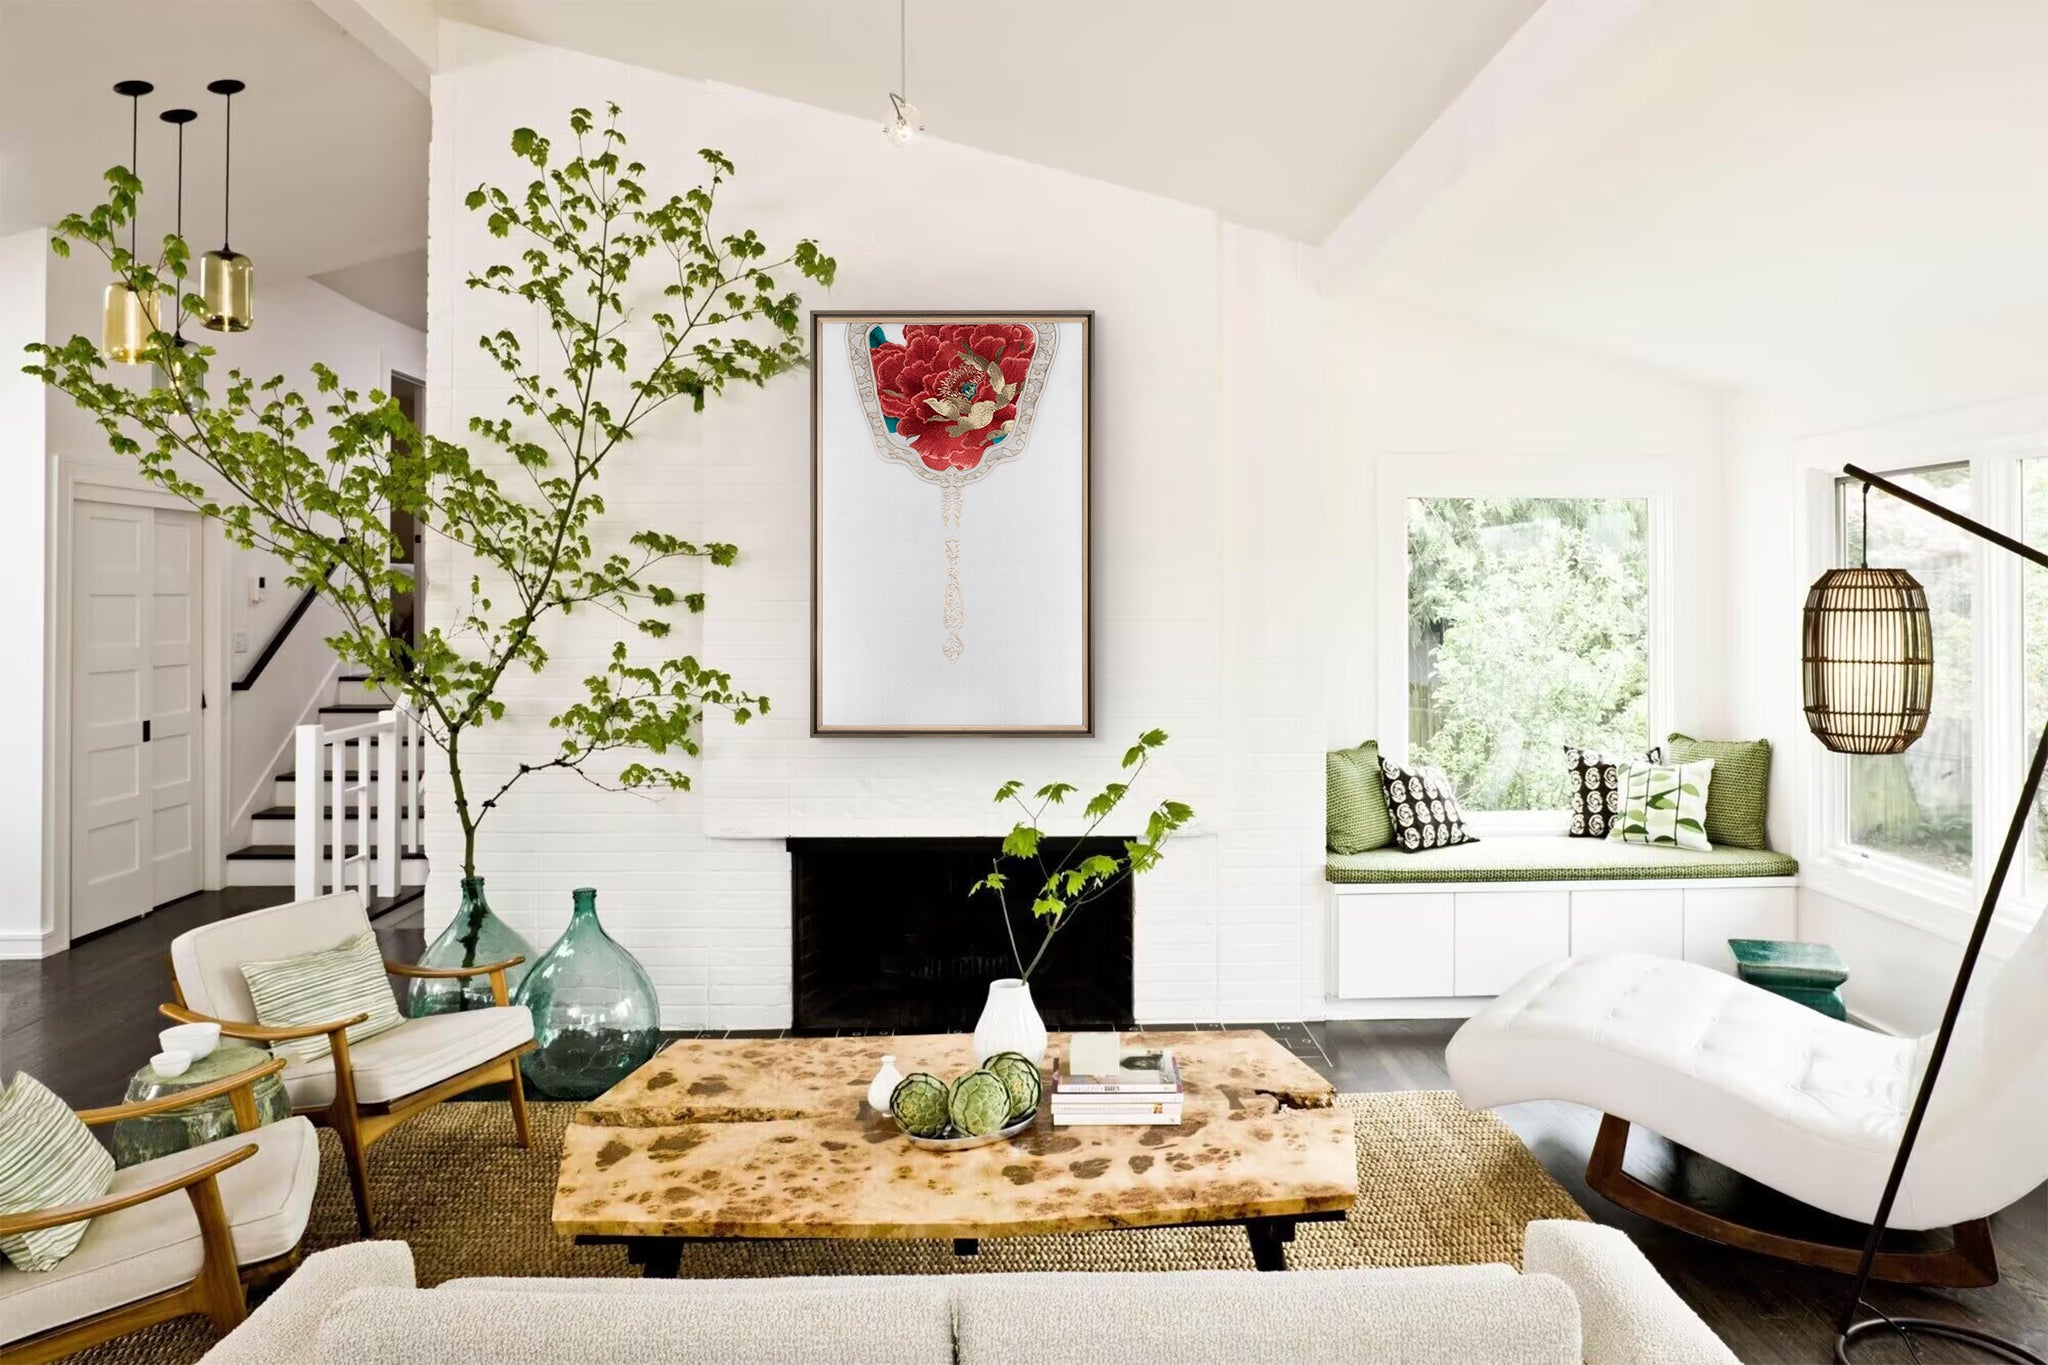 In a living room full of spring atmosphere, the green plants are lush, and the traditional peony imperial fan embroidery art makes the whole decoration very natural and comfortable